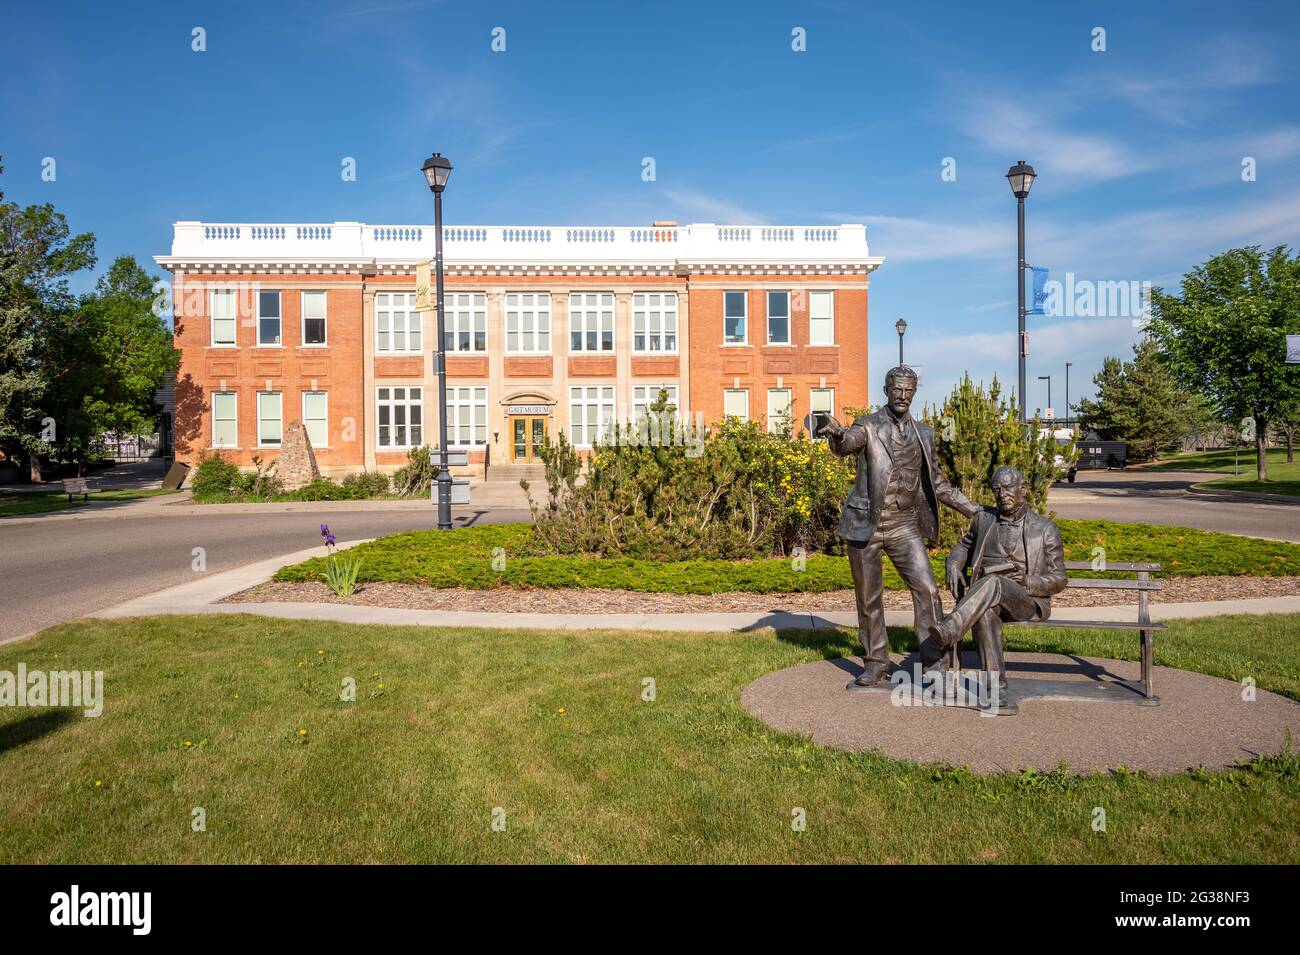 Lethbridge, Alberta - June 13, 2021: The exterior facade and grounds of the Galt Museum in Lethbridge. Stock Photo